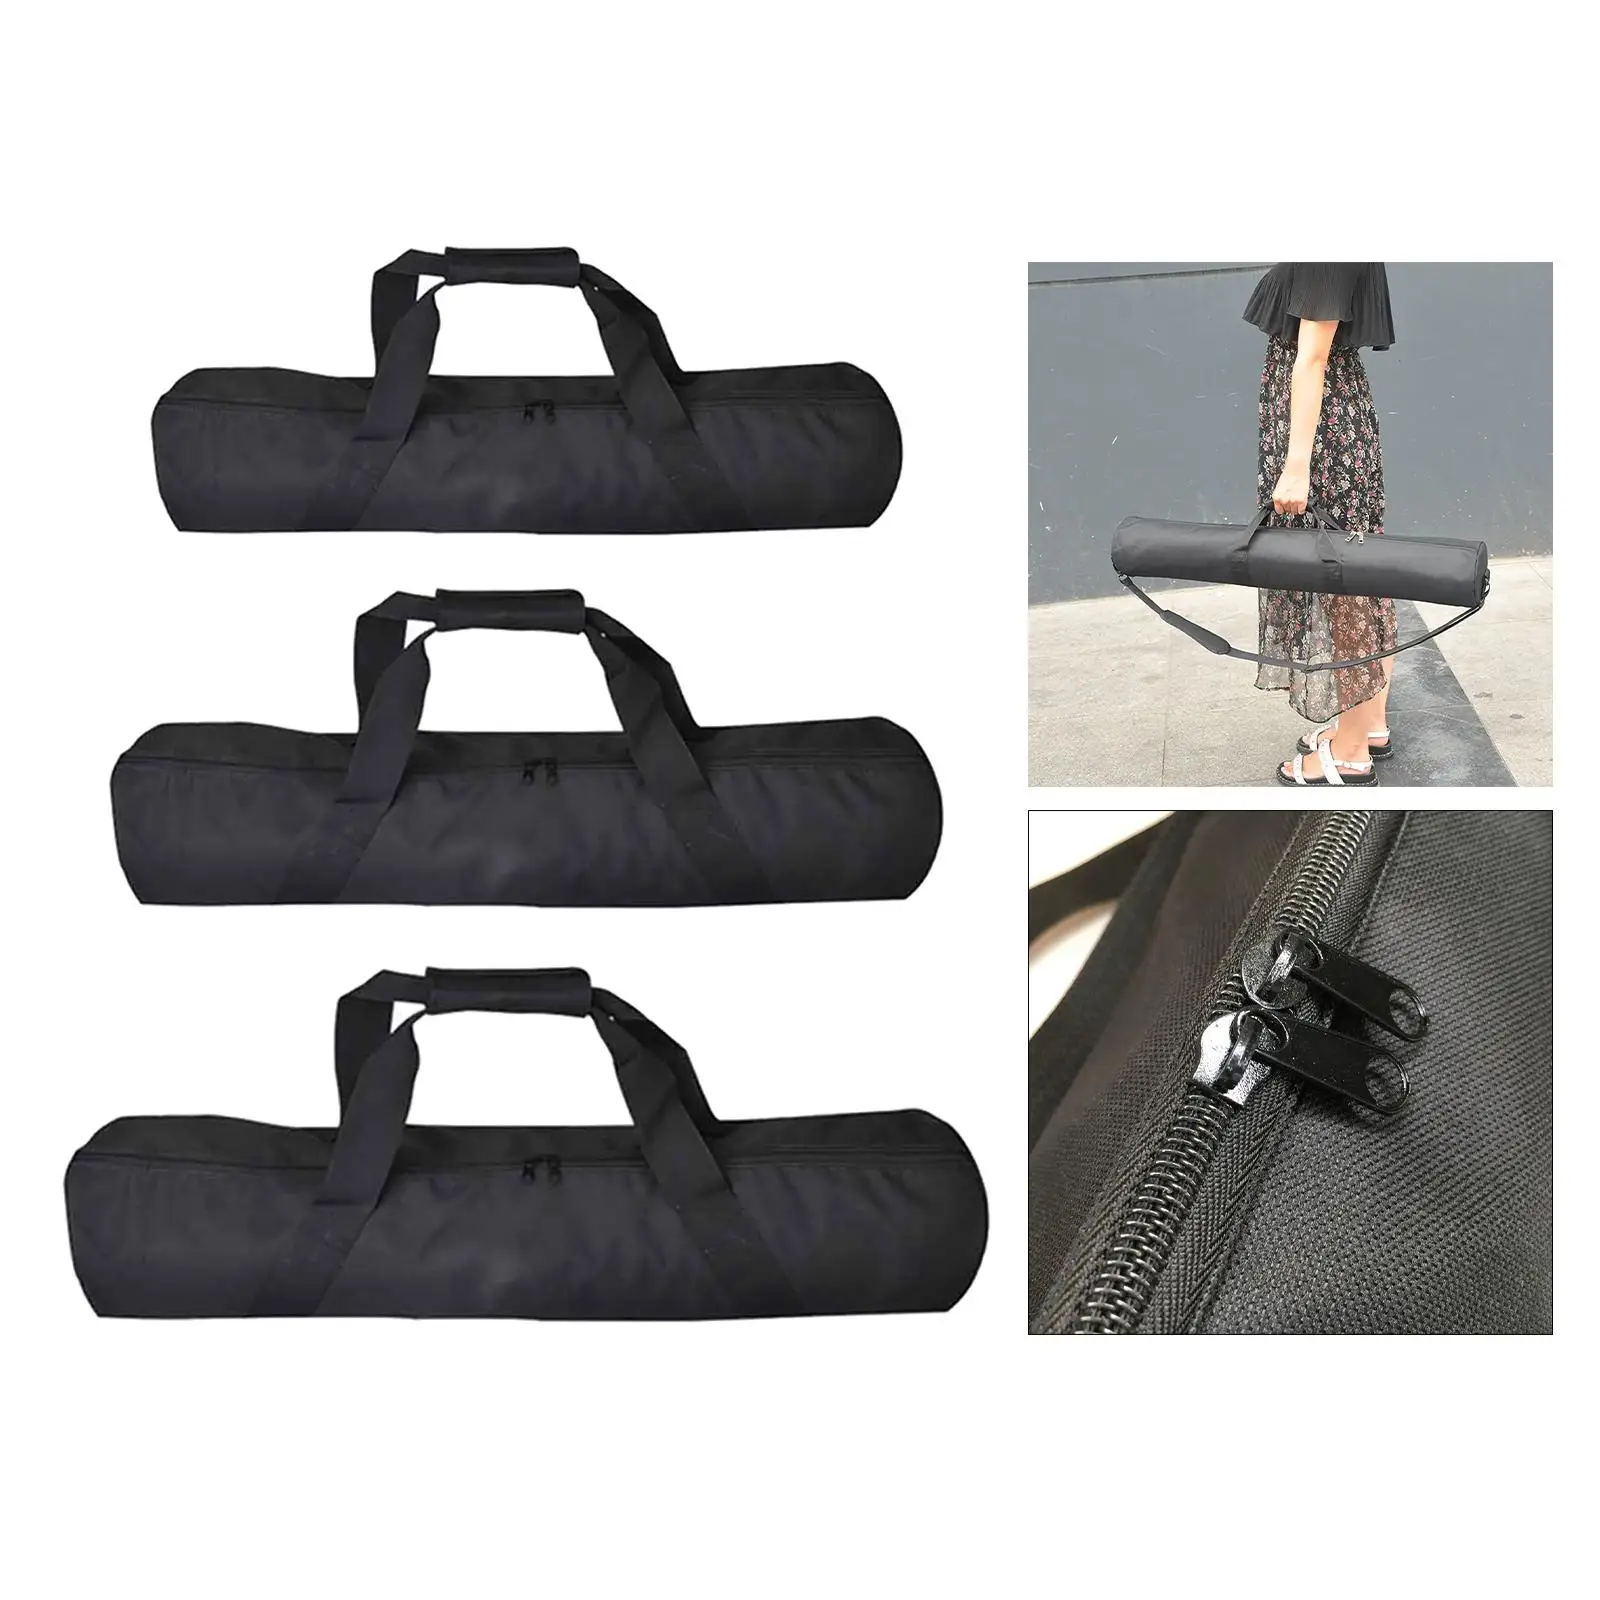 Portable Fishing Rod Reel Bag with Strap Fishing Tackle Bag Traveling Fishing Gears Case